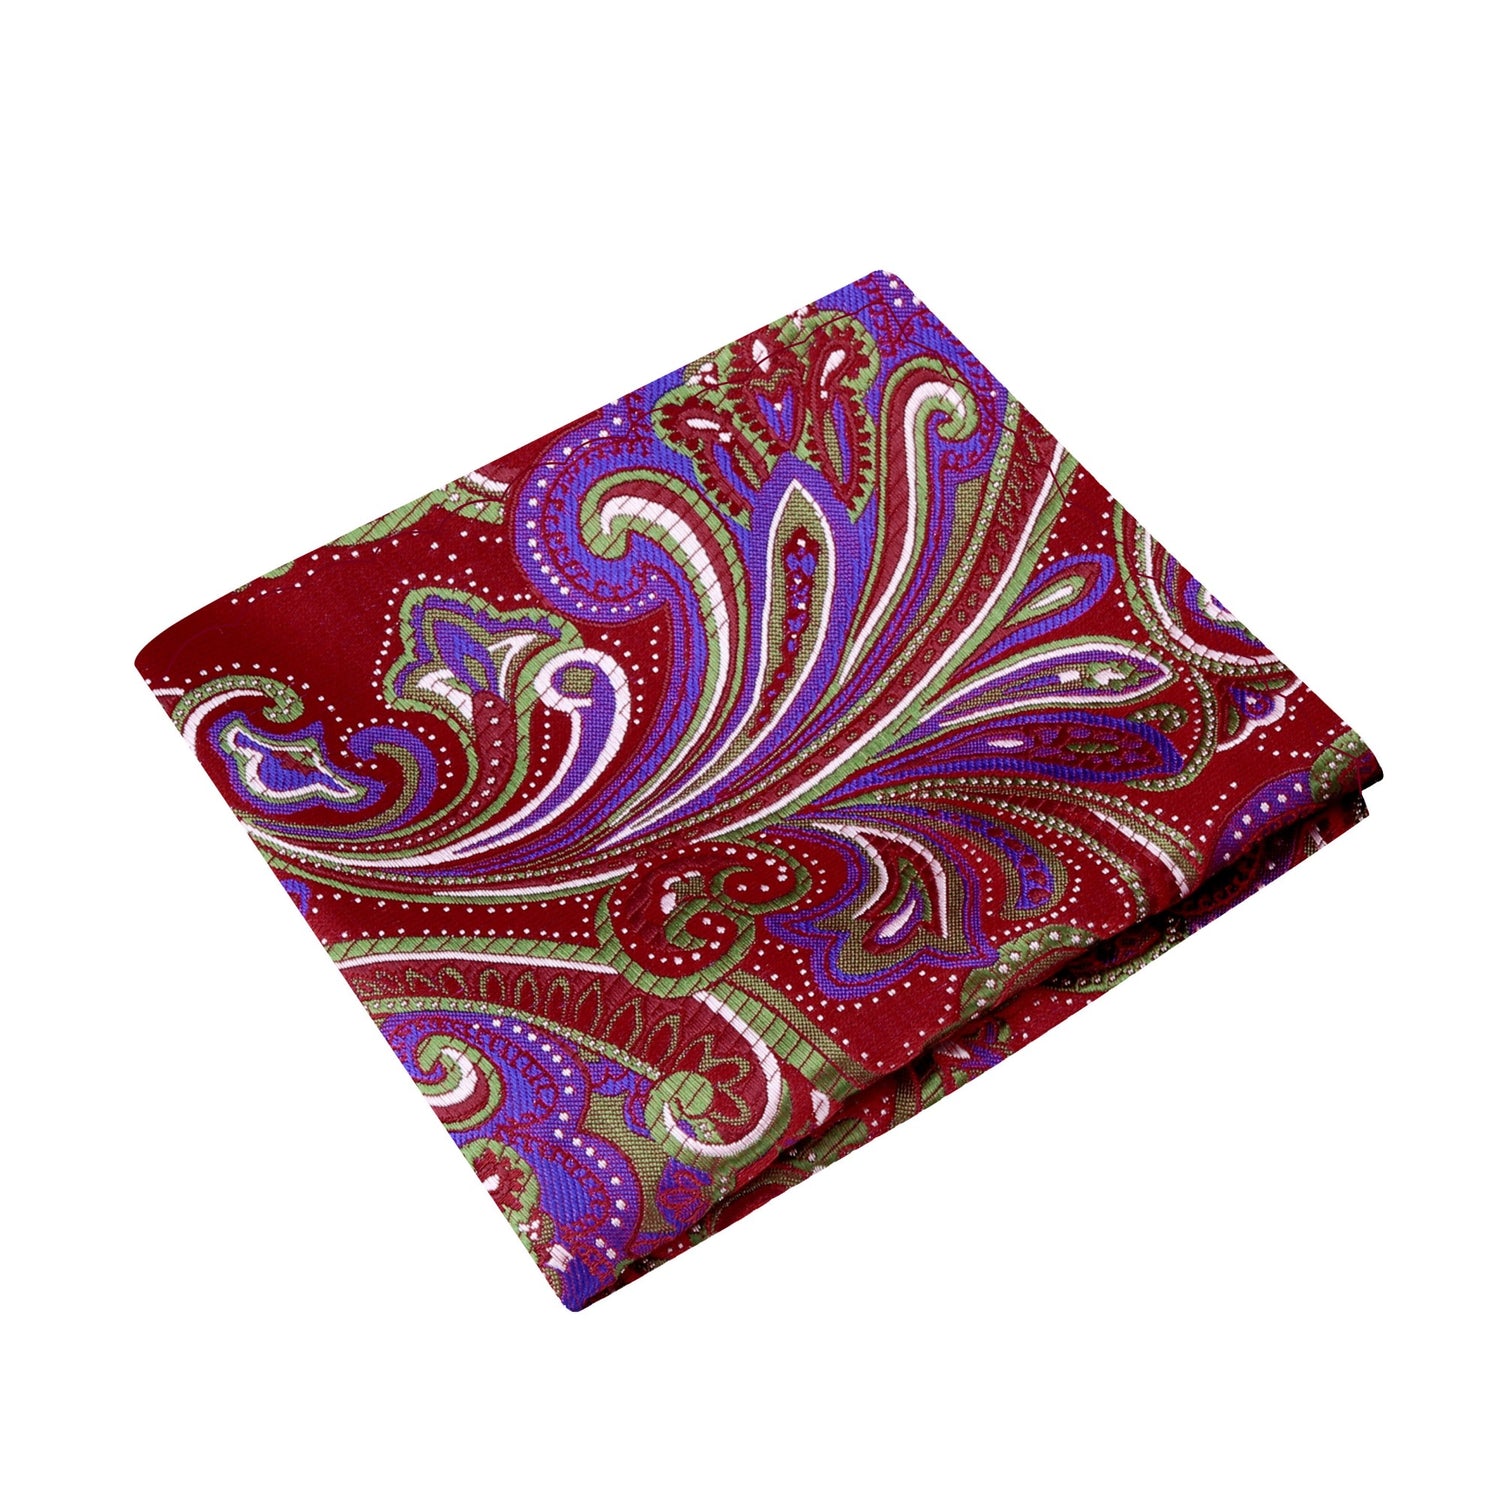 A Red, Purple, Green Paisley Pattern Silk Pocket Square